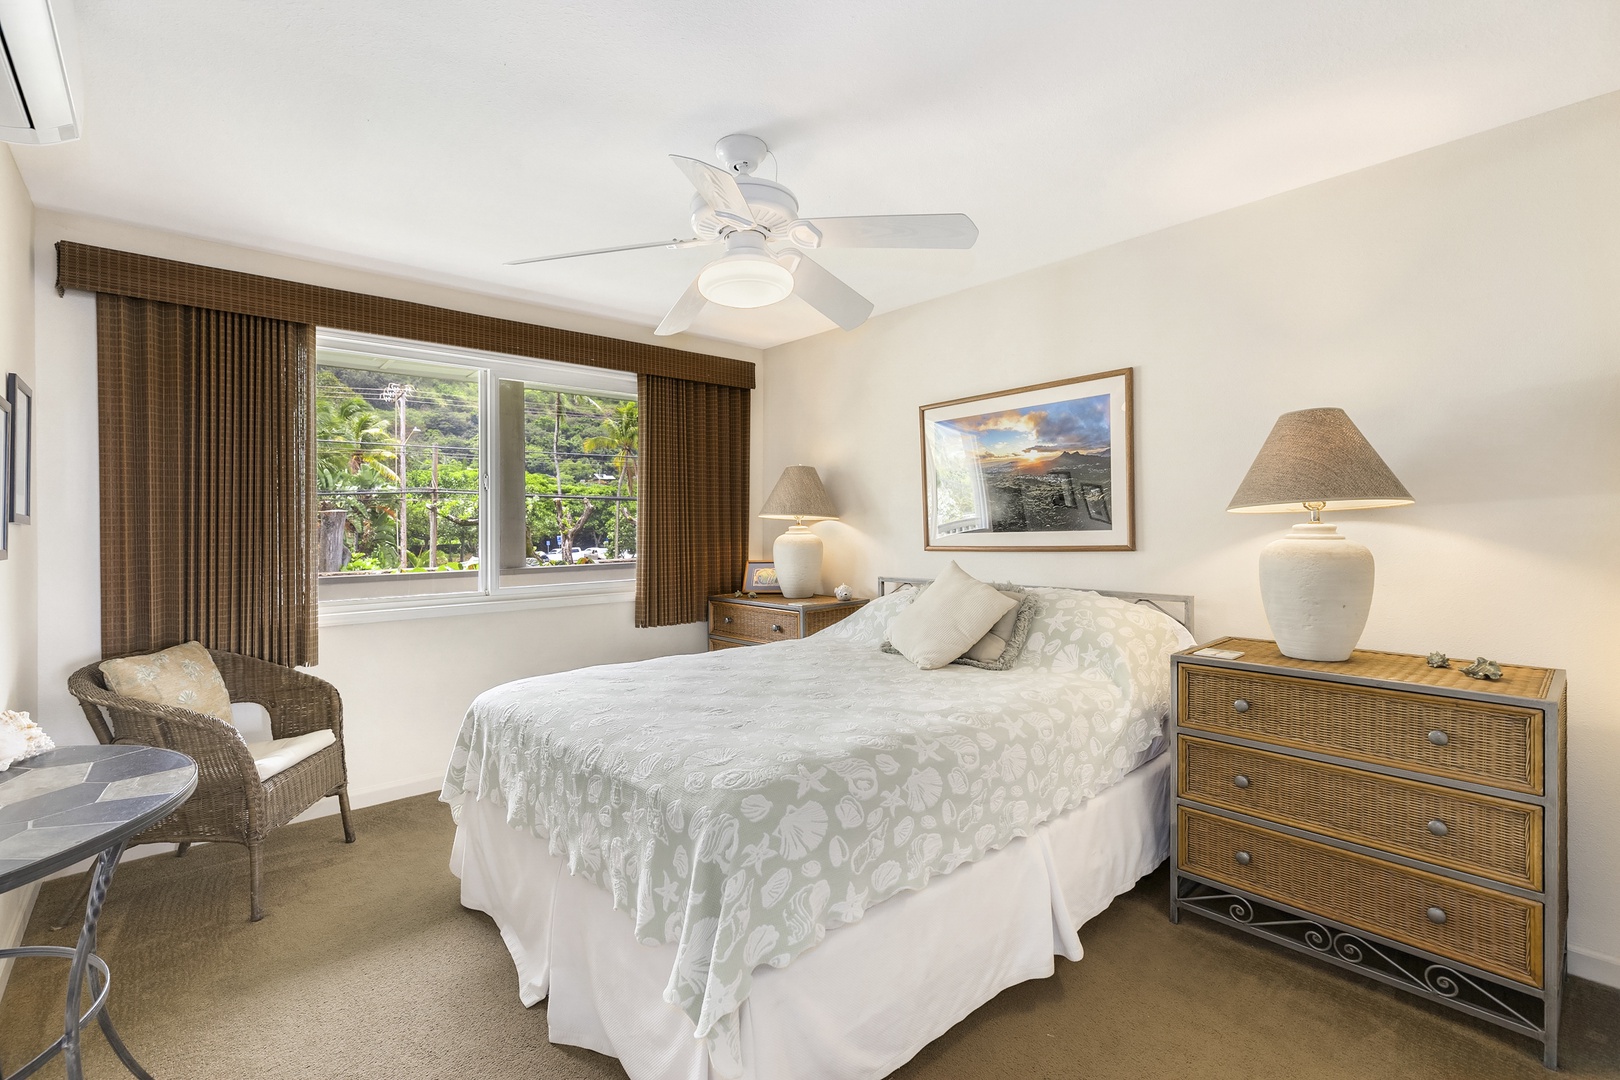 Haleiwa Vacation Rentals, Hale Kimo - Guest bedroom two with a queen bed, fan and natural lighting.